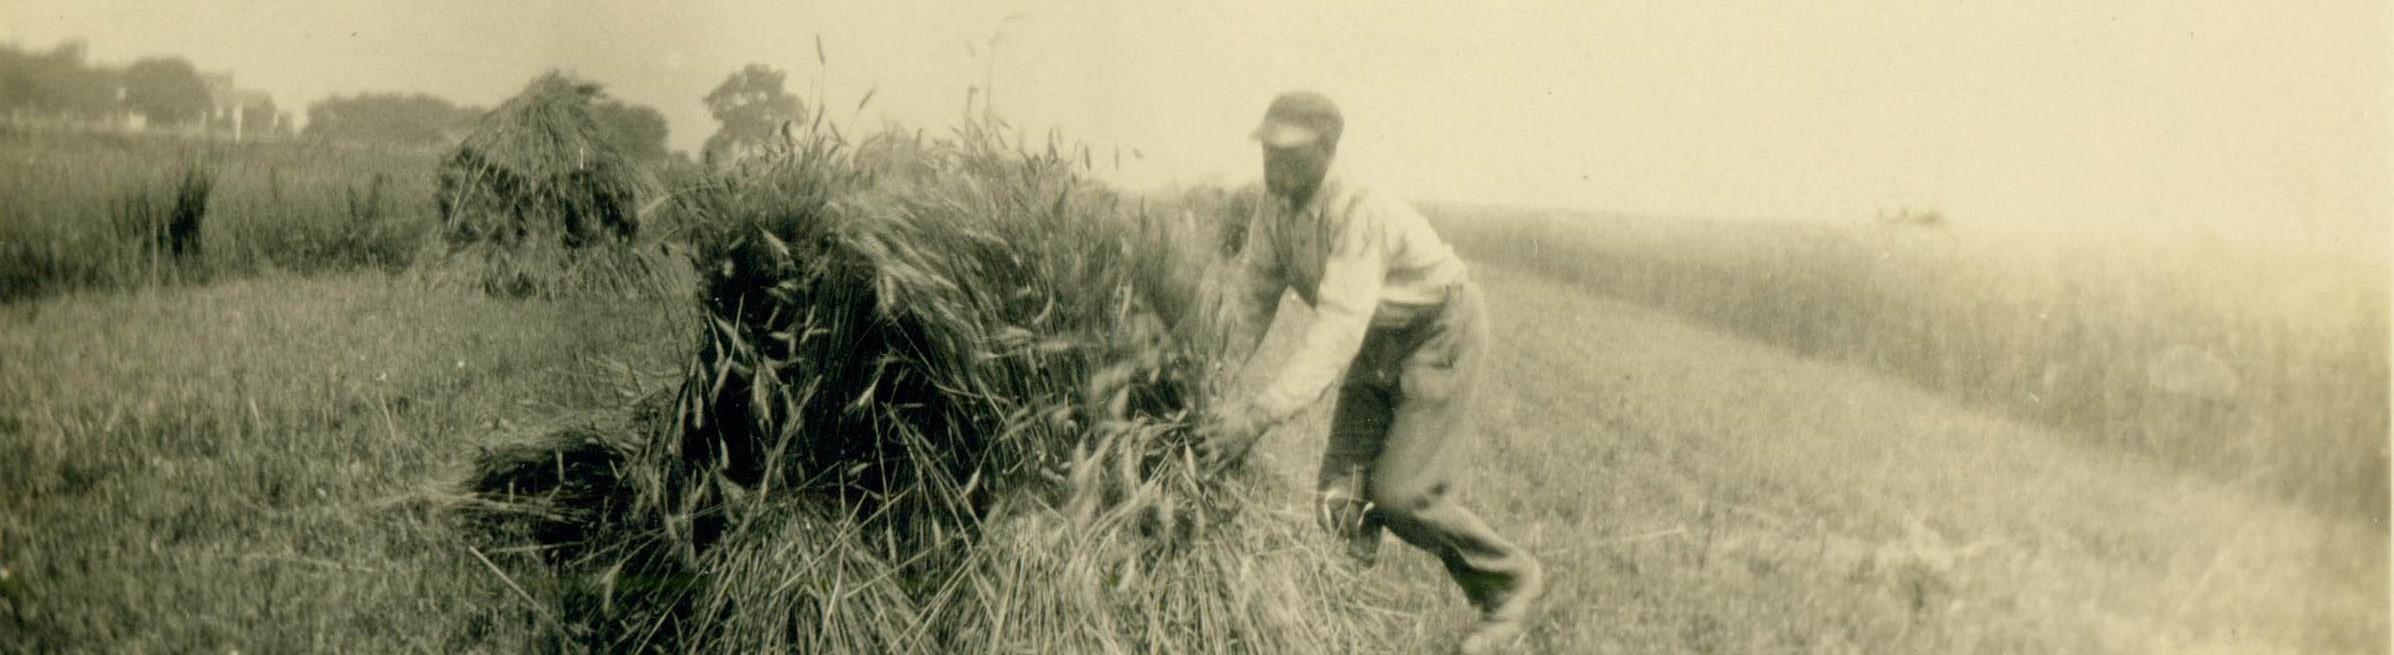 Black man at work in a field